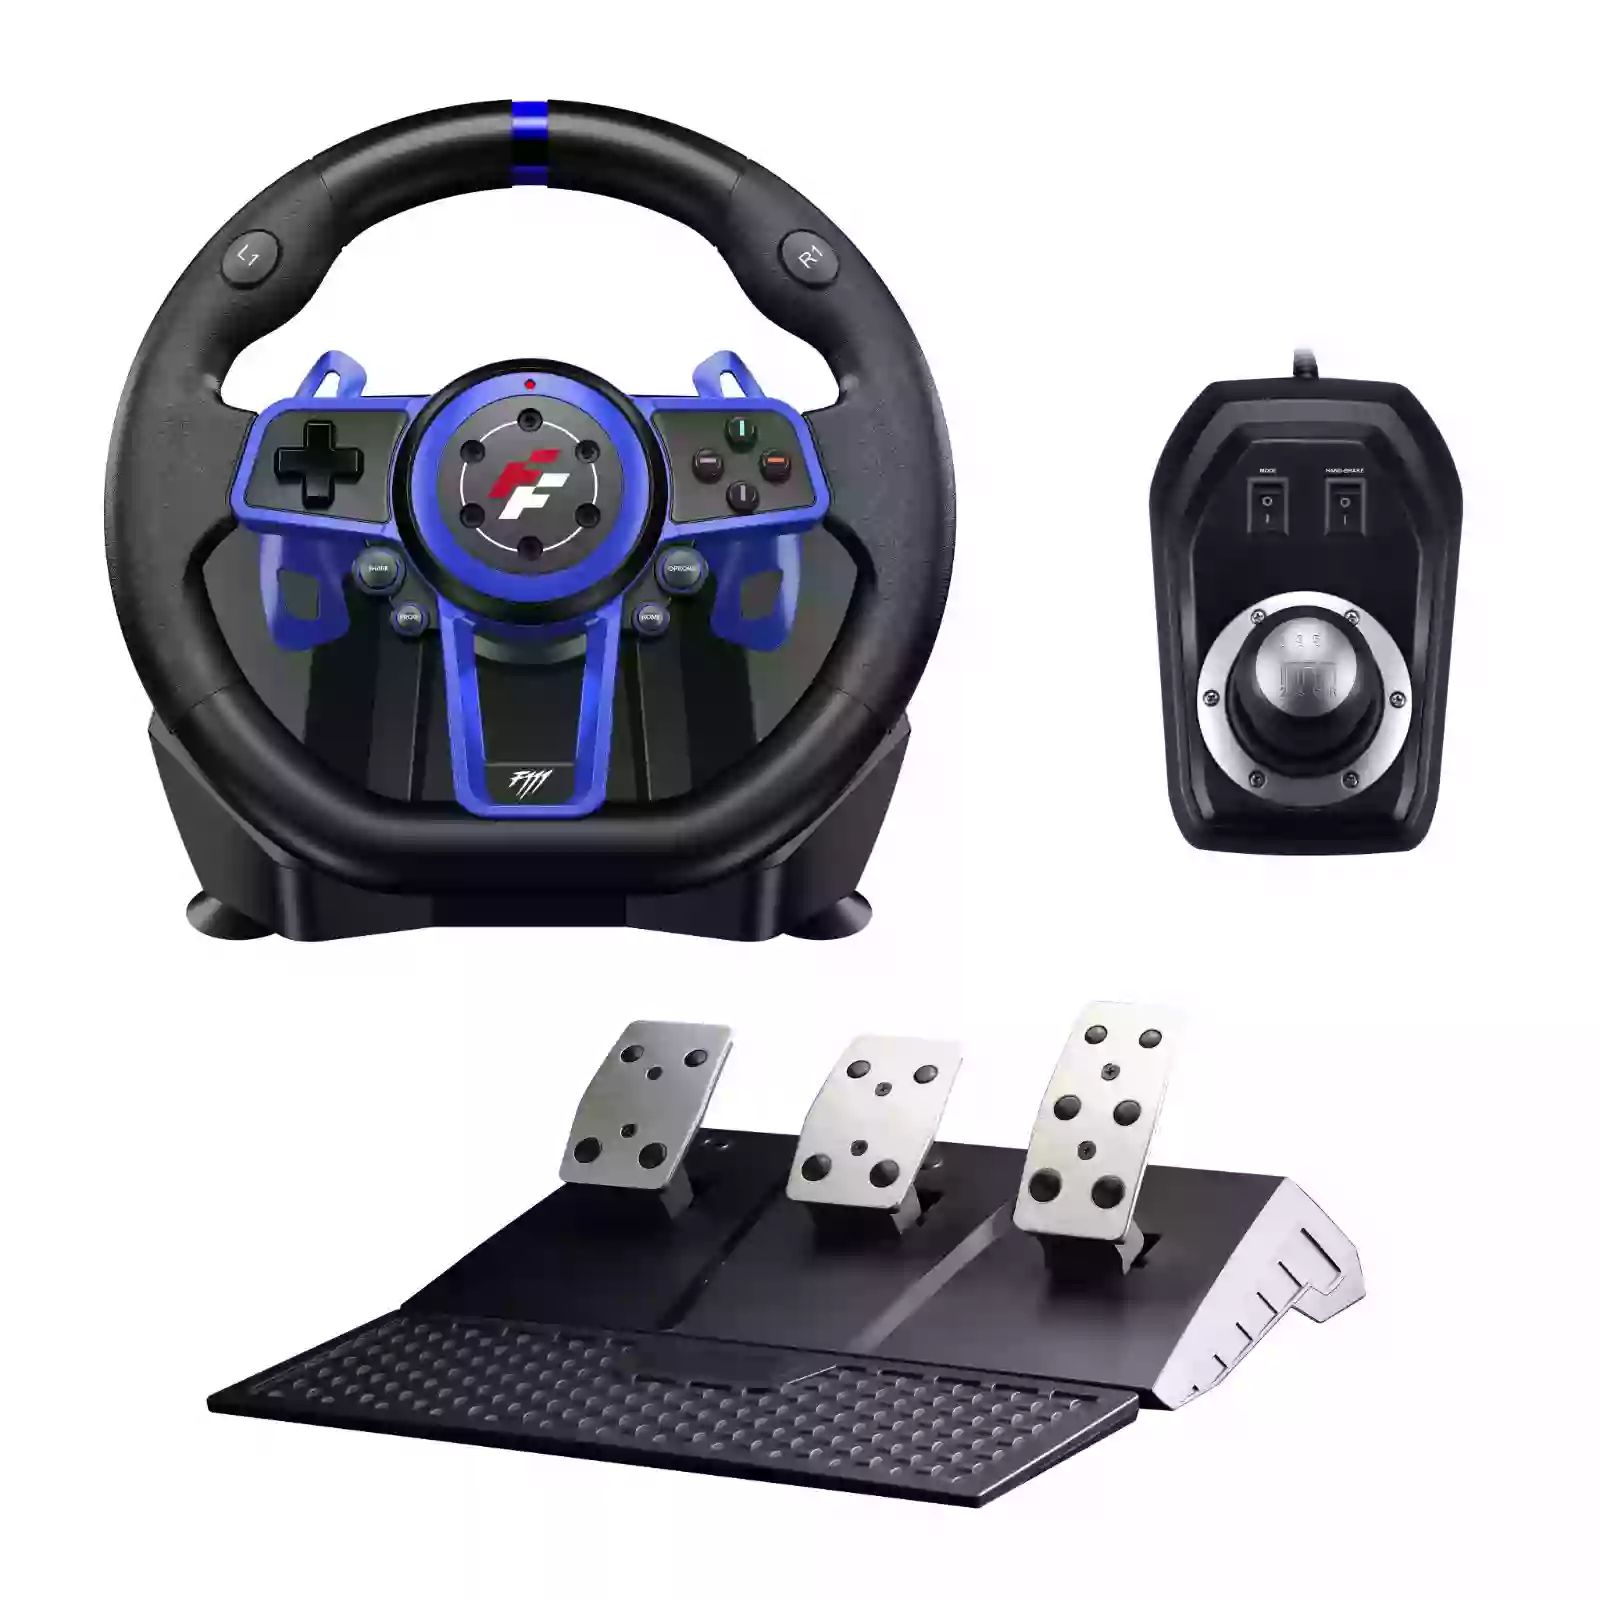 Suzuka F111 racing wheel set with Clutch pedals and H-shifter for PS5, PS4, NS, PC